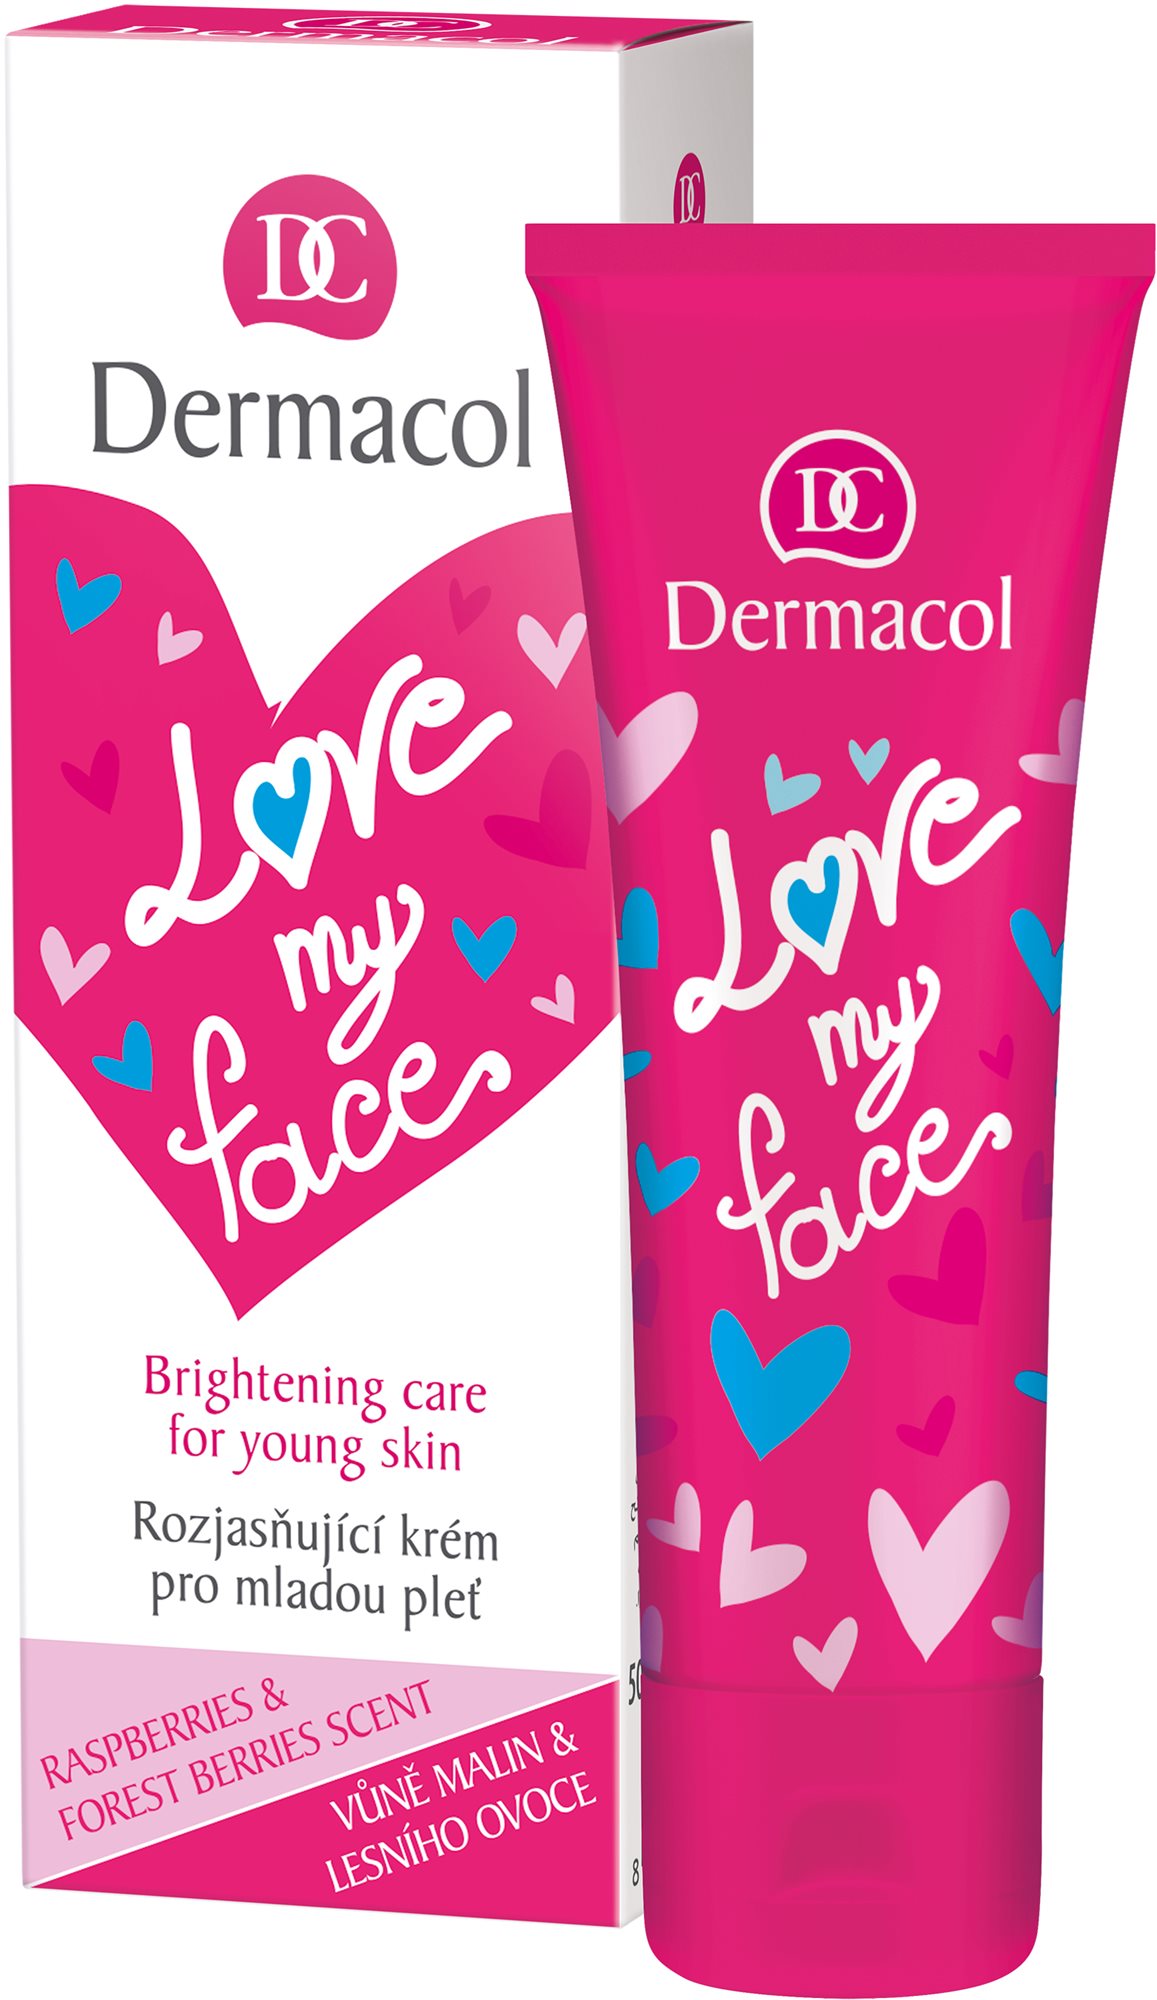 DERMACOL Love My Face Brigthening Care Rasberries & Forst Berries Scent 50 ml